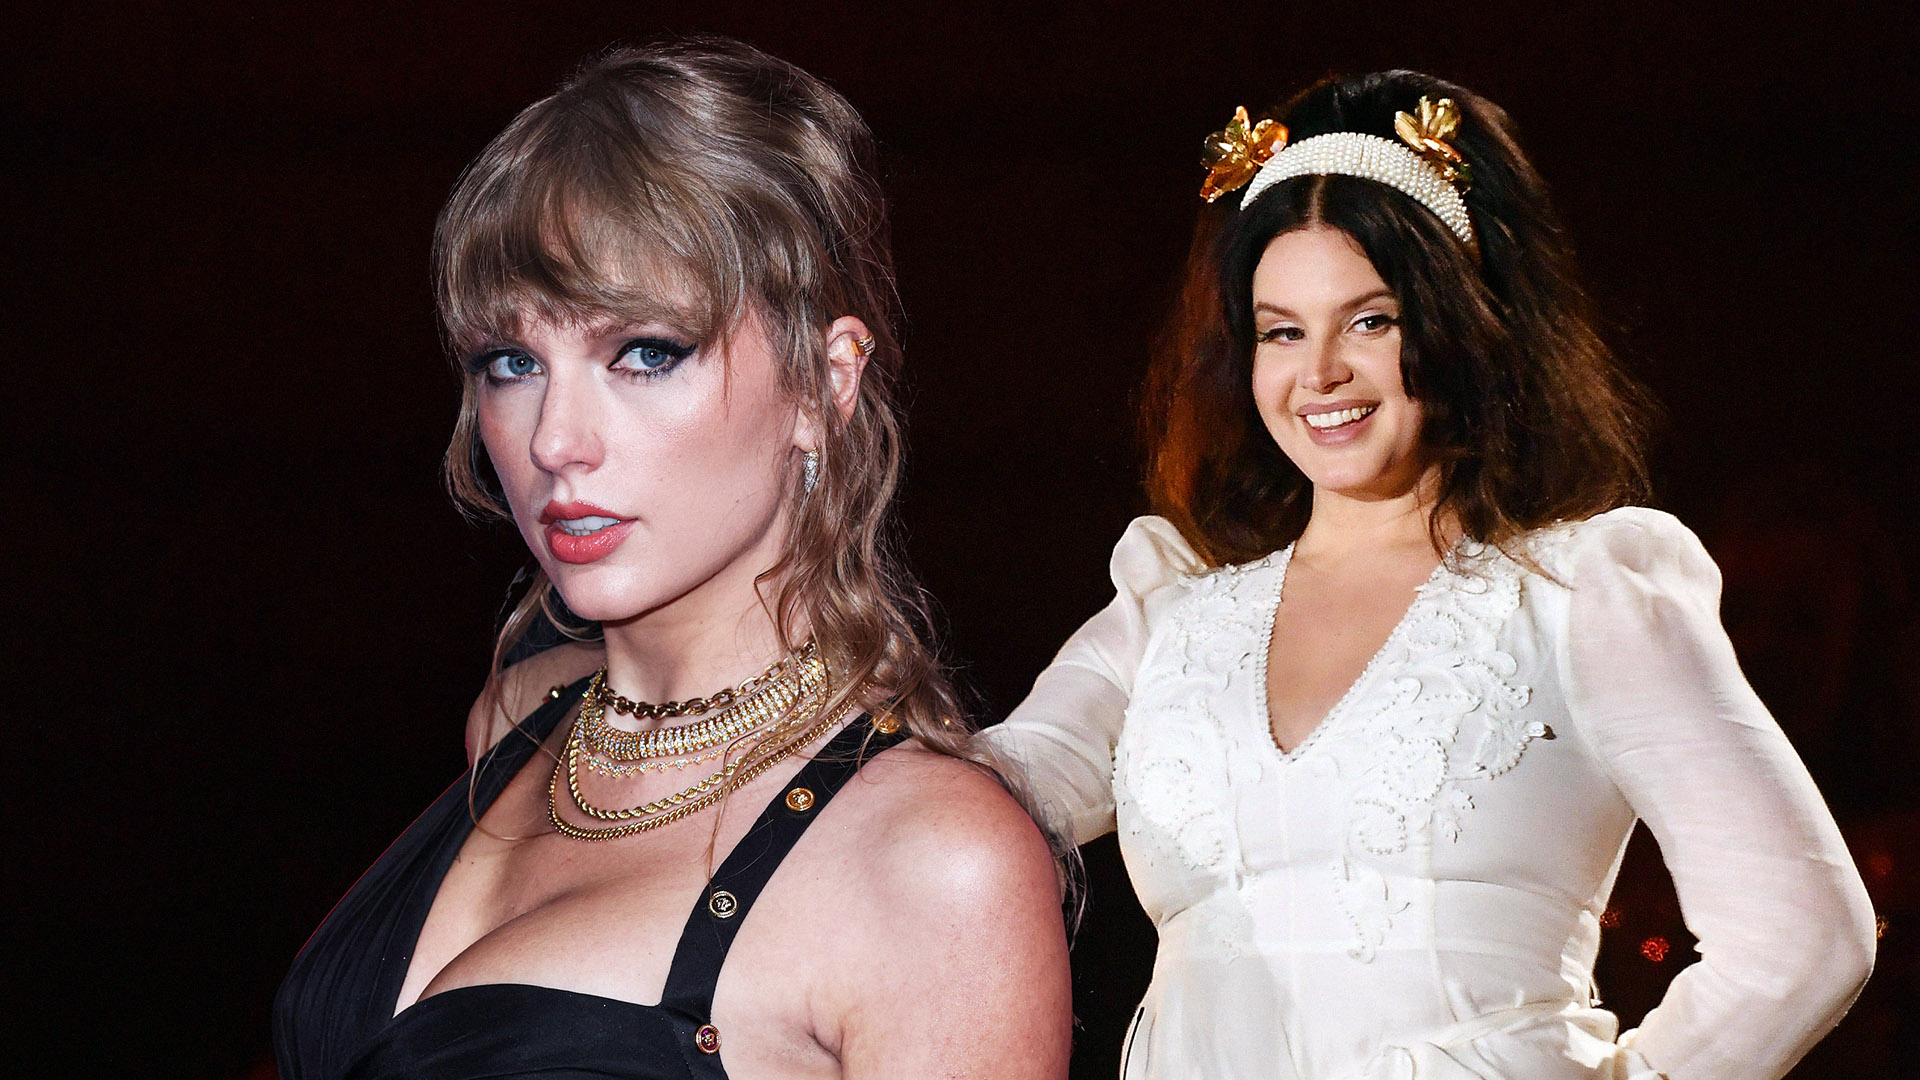 How Come Lana Del Rey Is Almost Absent from Her Snow On the Beach Collab with Taylor Swift?